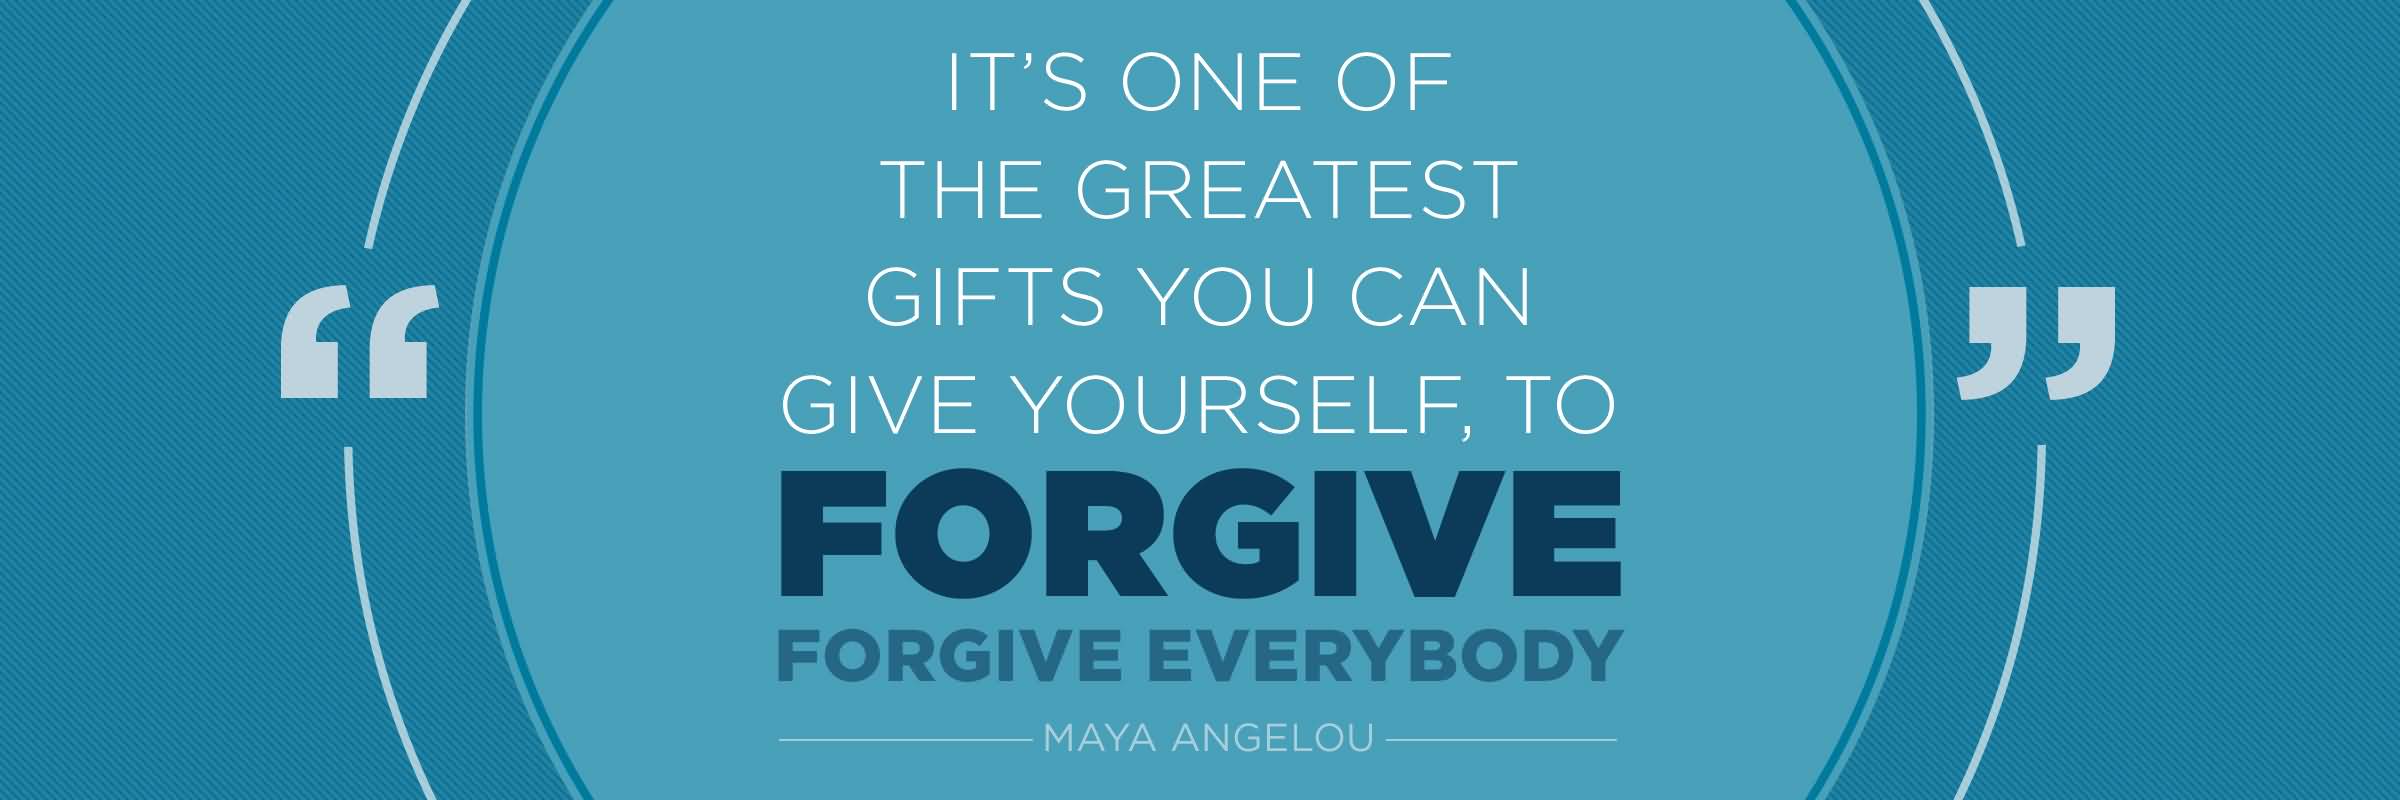 It’s One Of The Greatest Gifts You Can Give Yourself To Forgive